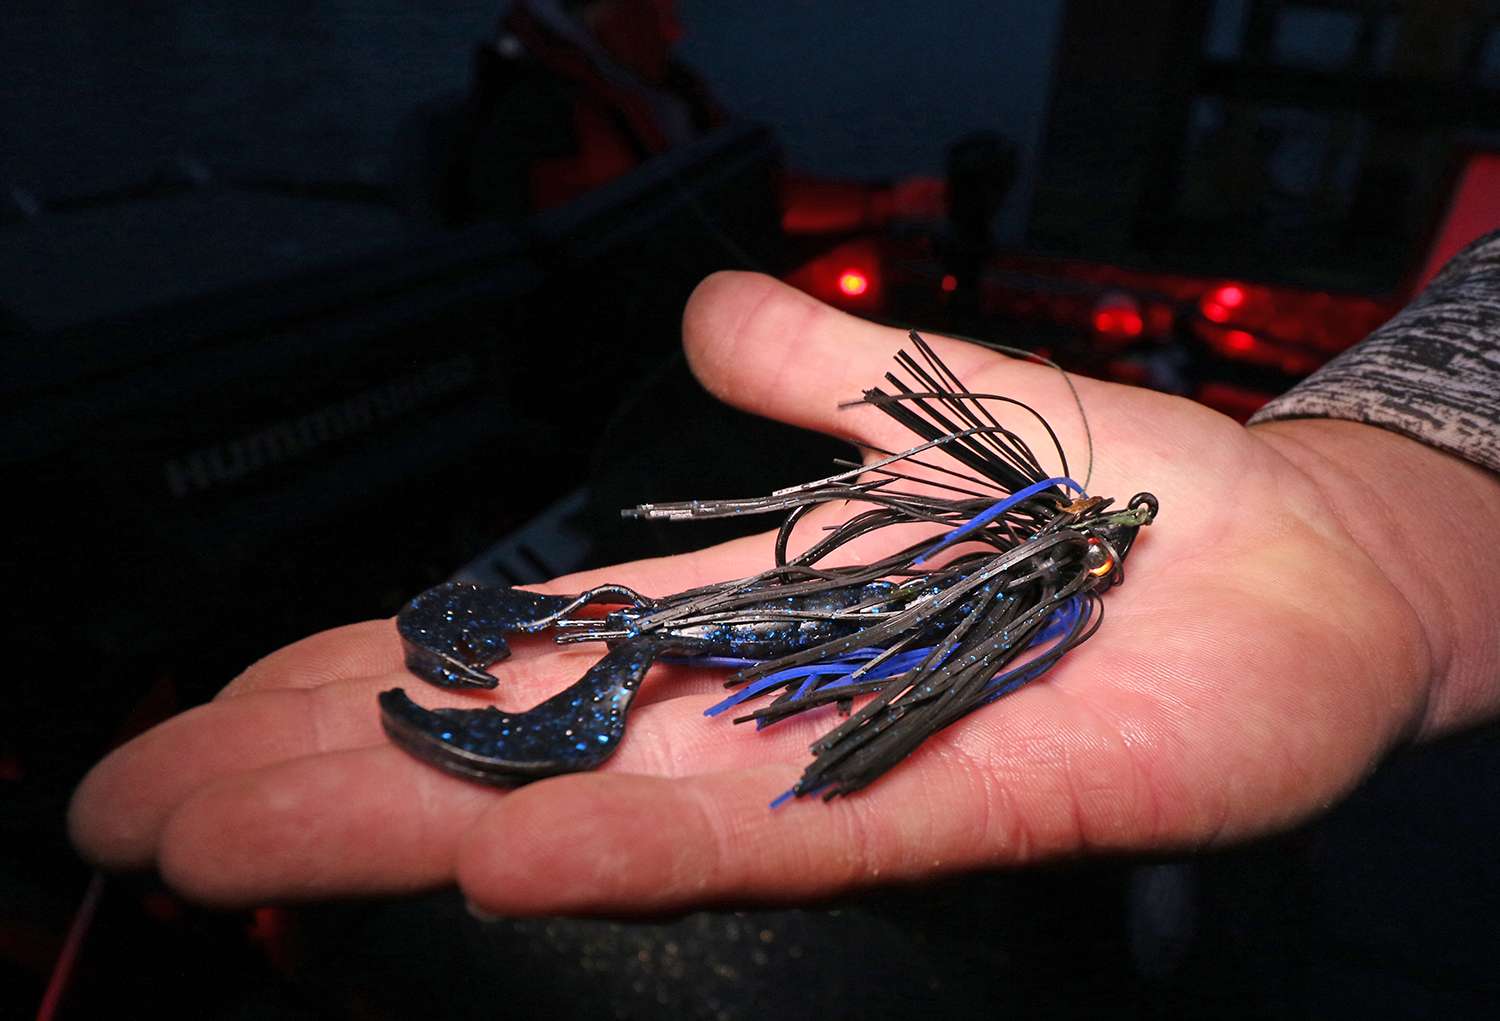 To finish second Justin Margraves used this 5/16-ounce Santone Lures Swim Jig with 4-inch Strike King Rage Tail Craw.